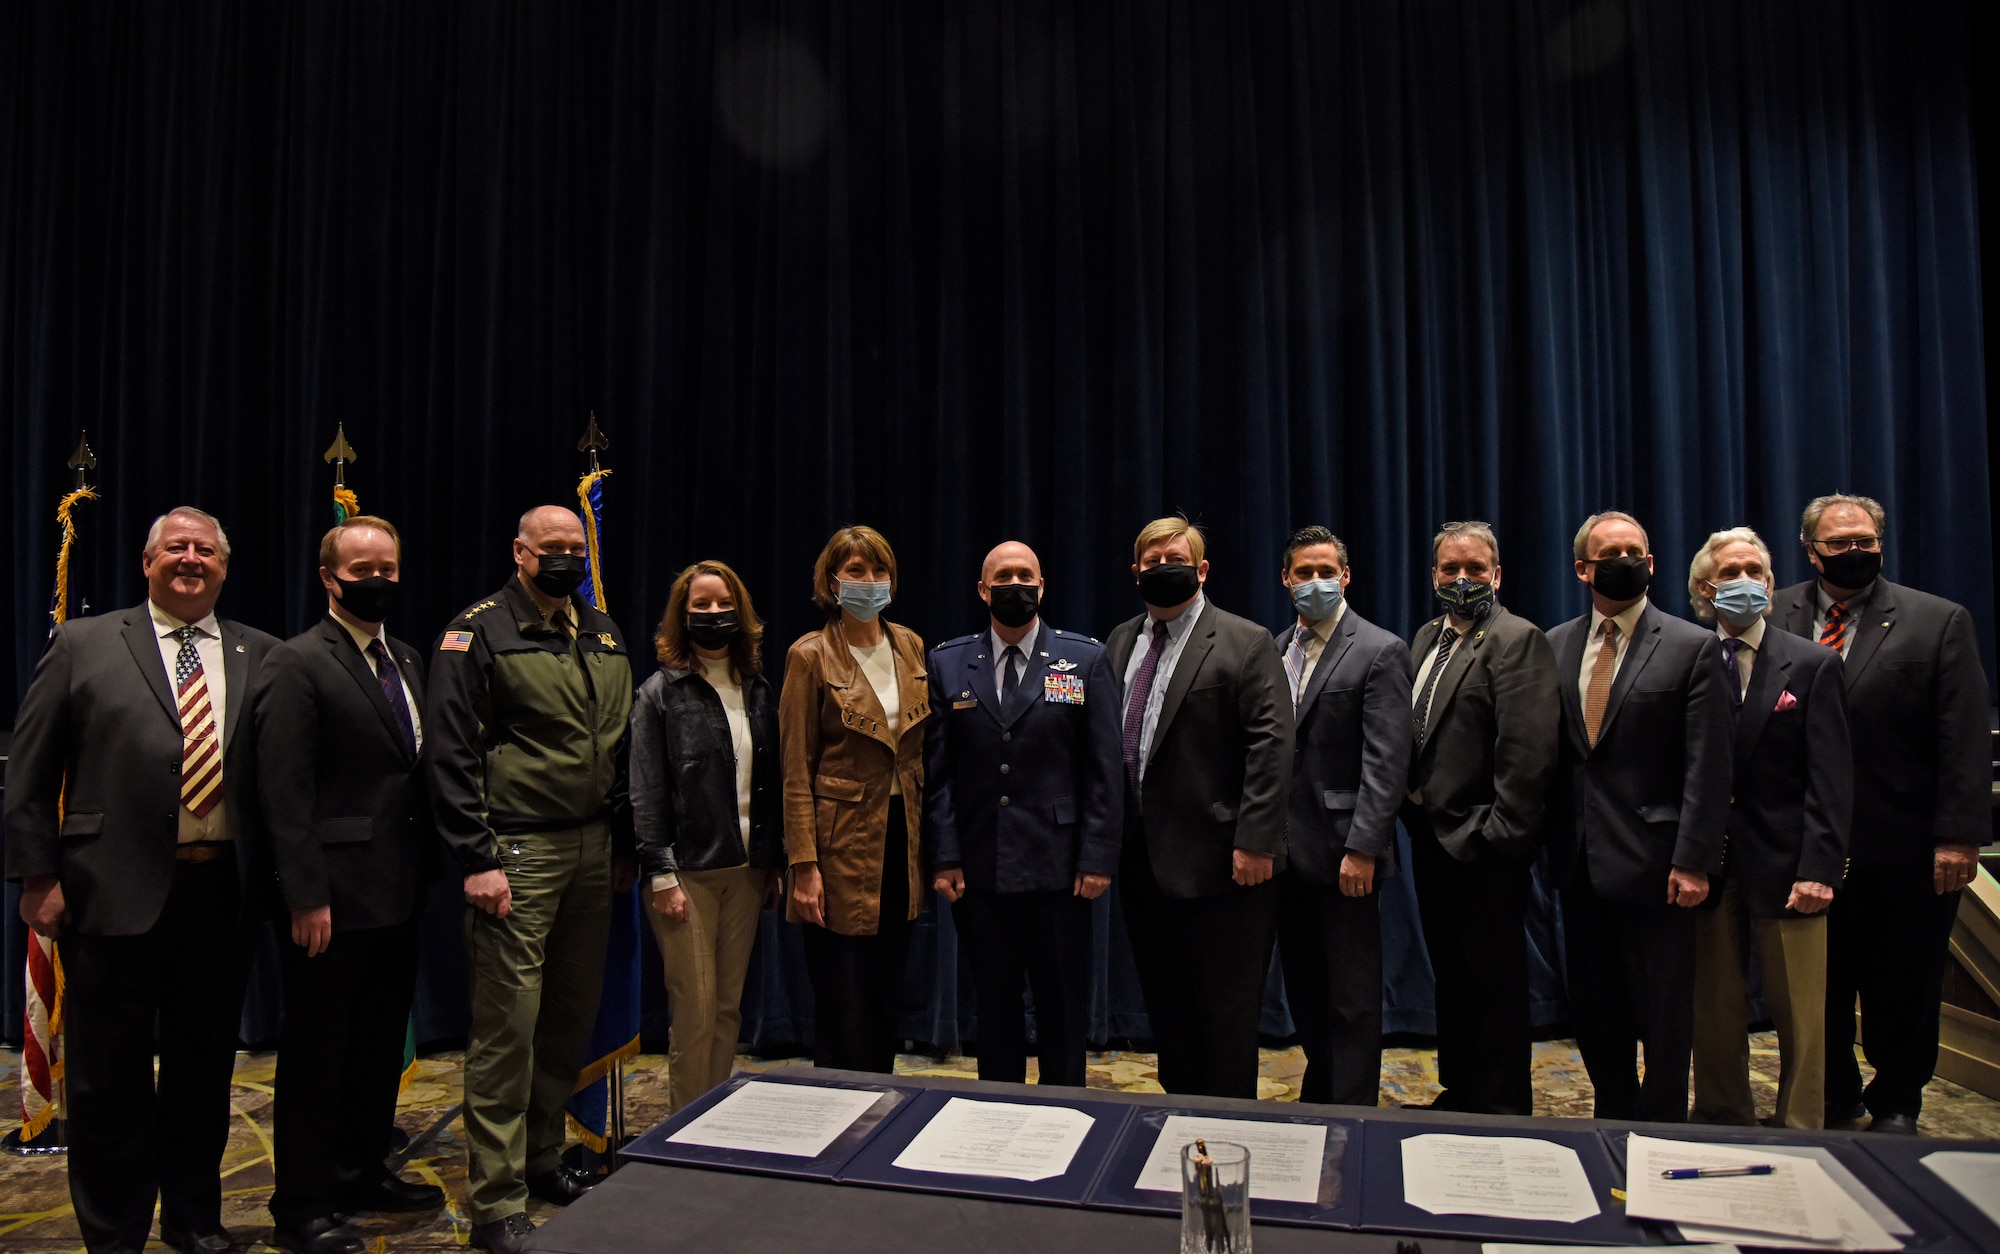 Representatives from Fairchild Air Force Base, the Spokane County Sheriff’s Office, and the Spokane County Board of Commissioners pose for a group photo on March 15, 2021, in Airway Heights, Washington. An event was held to sign a one-of-a-kind Intergovernmental Support Agreement (IGSA) for the Spokane Regional Indoor Small Arms Range Partnership. (U.S. Air Force photo by Staff Sgt. Jesenia Landaverde)